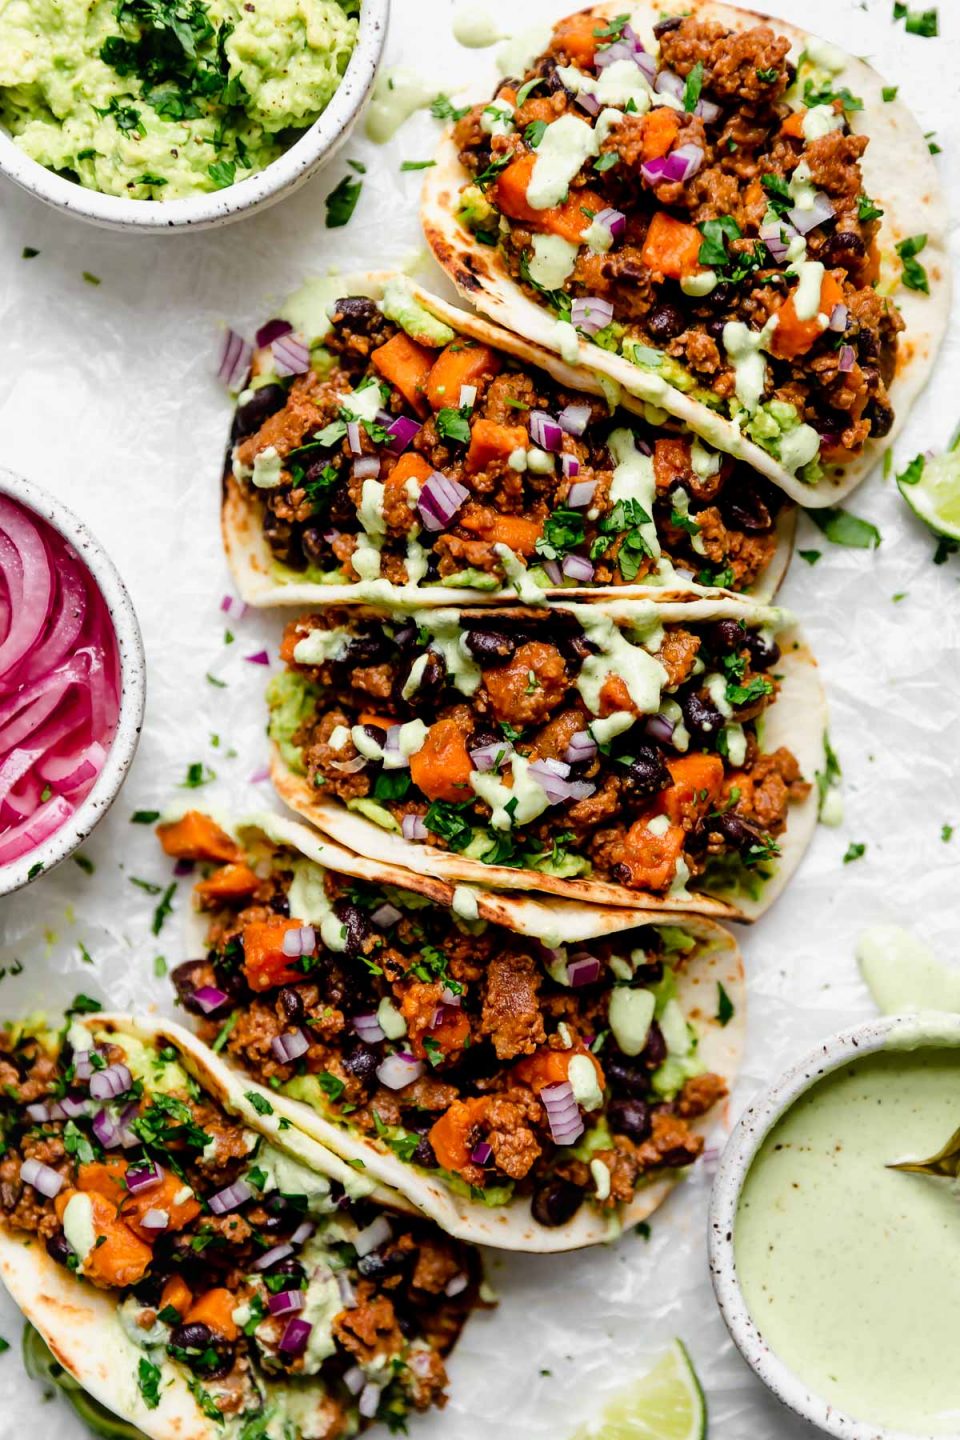 Chorizo Sweet Potato Tacos arranged on a white surface. The tacos are topped with a drizzle of homemade cilantro lime crema. Surrounding the tacos are small bowls of taco toppings (pickled red onions, guacamole, crema, etc.).